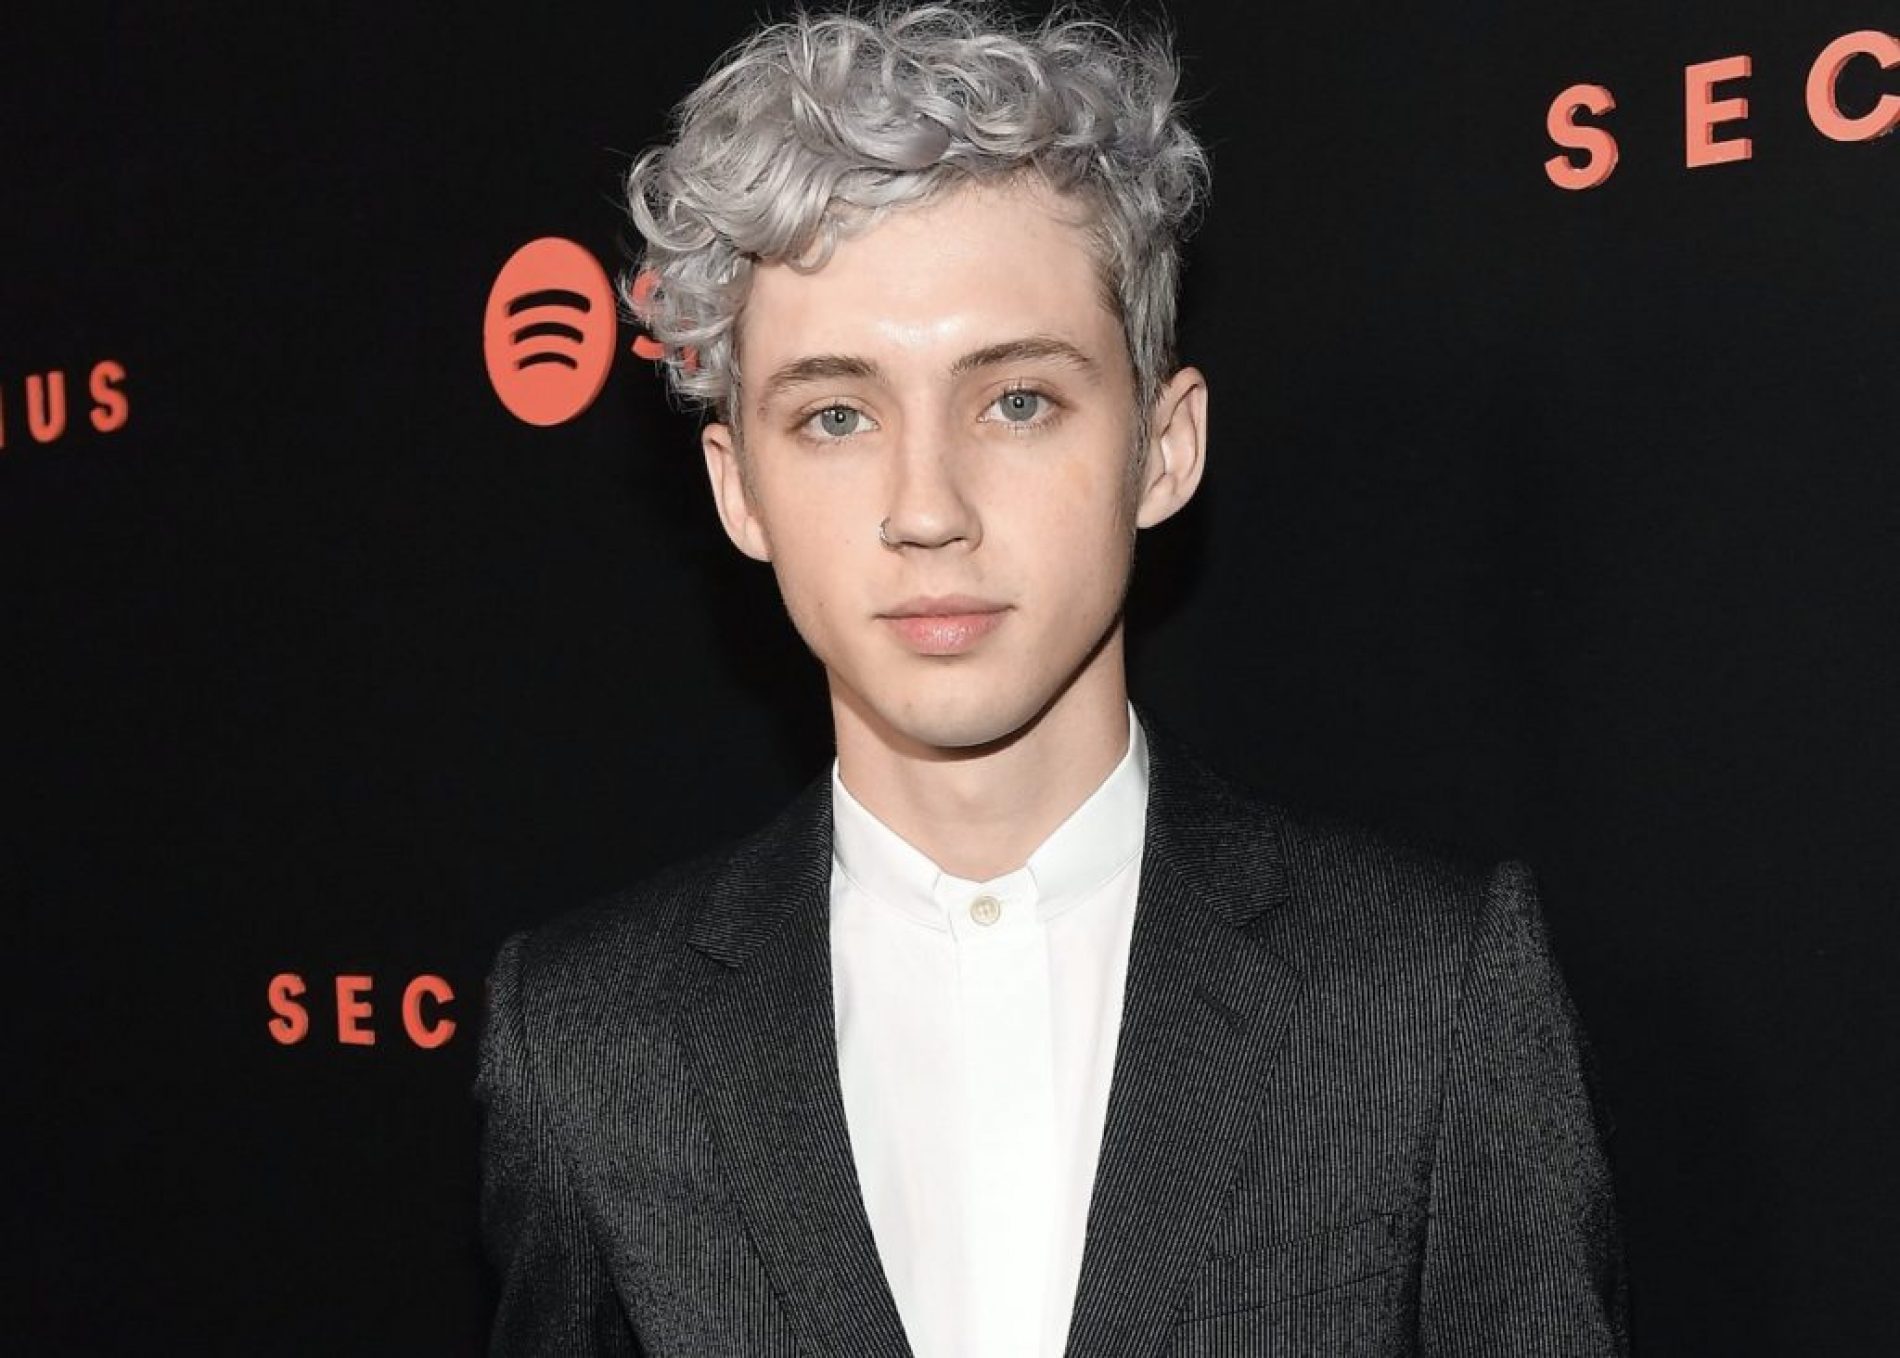 Troye Sivan responds to the question of him being a “bottom icon”